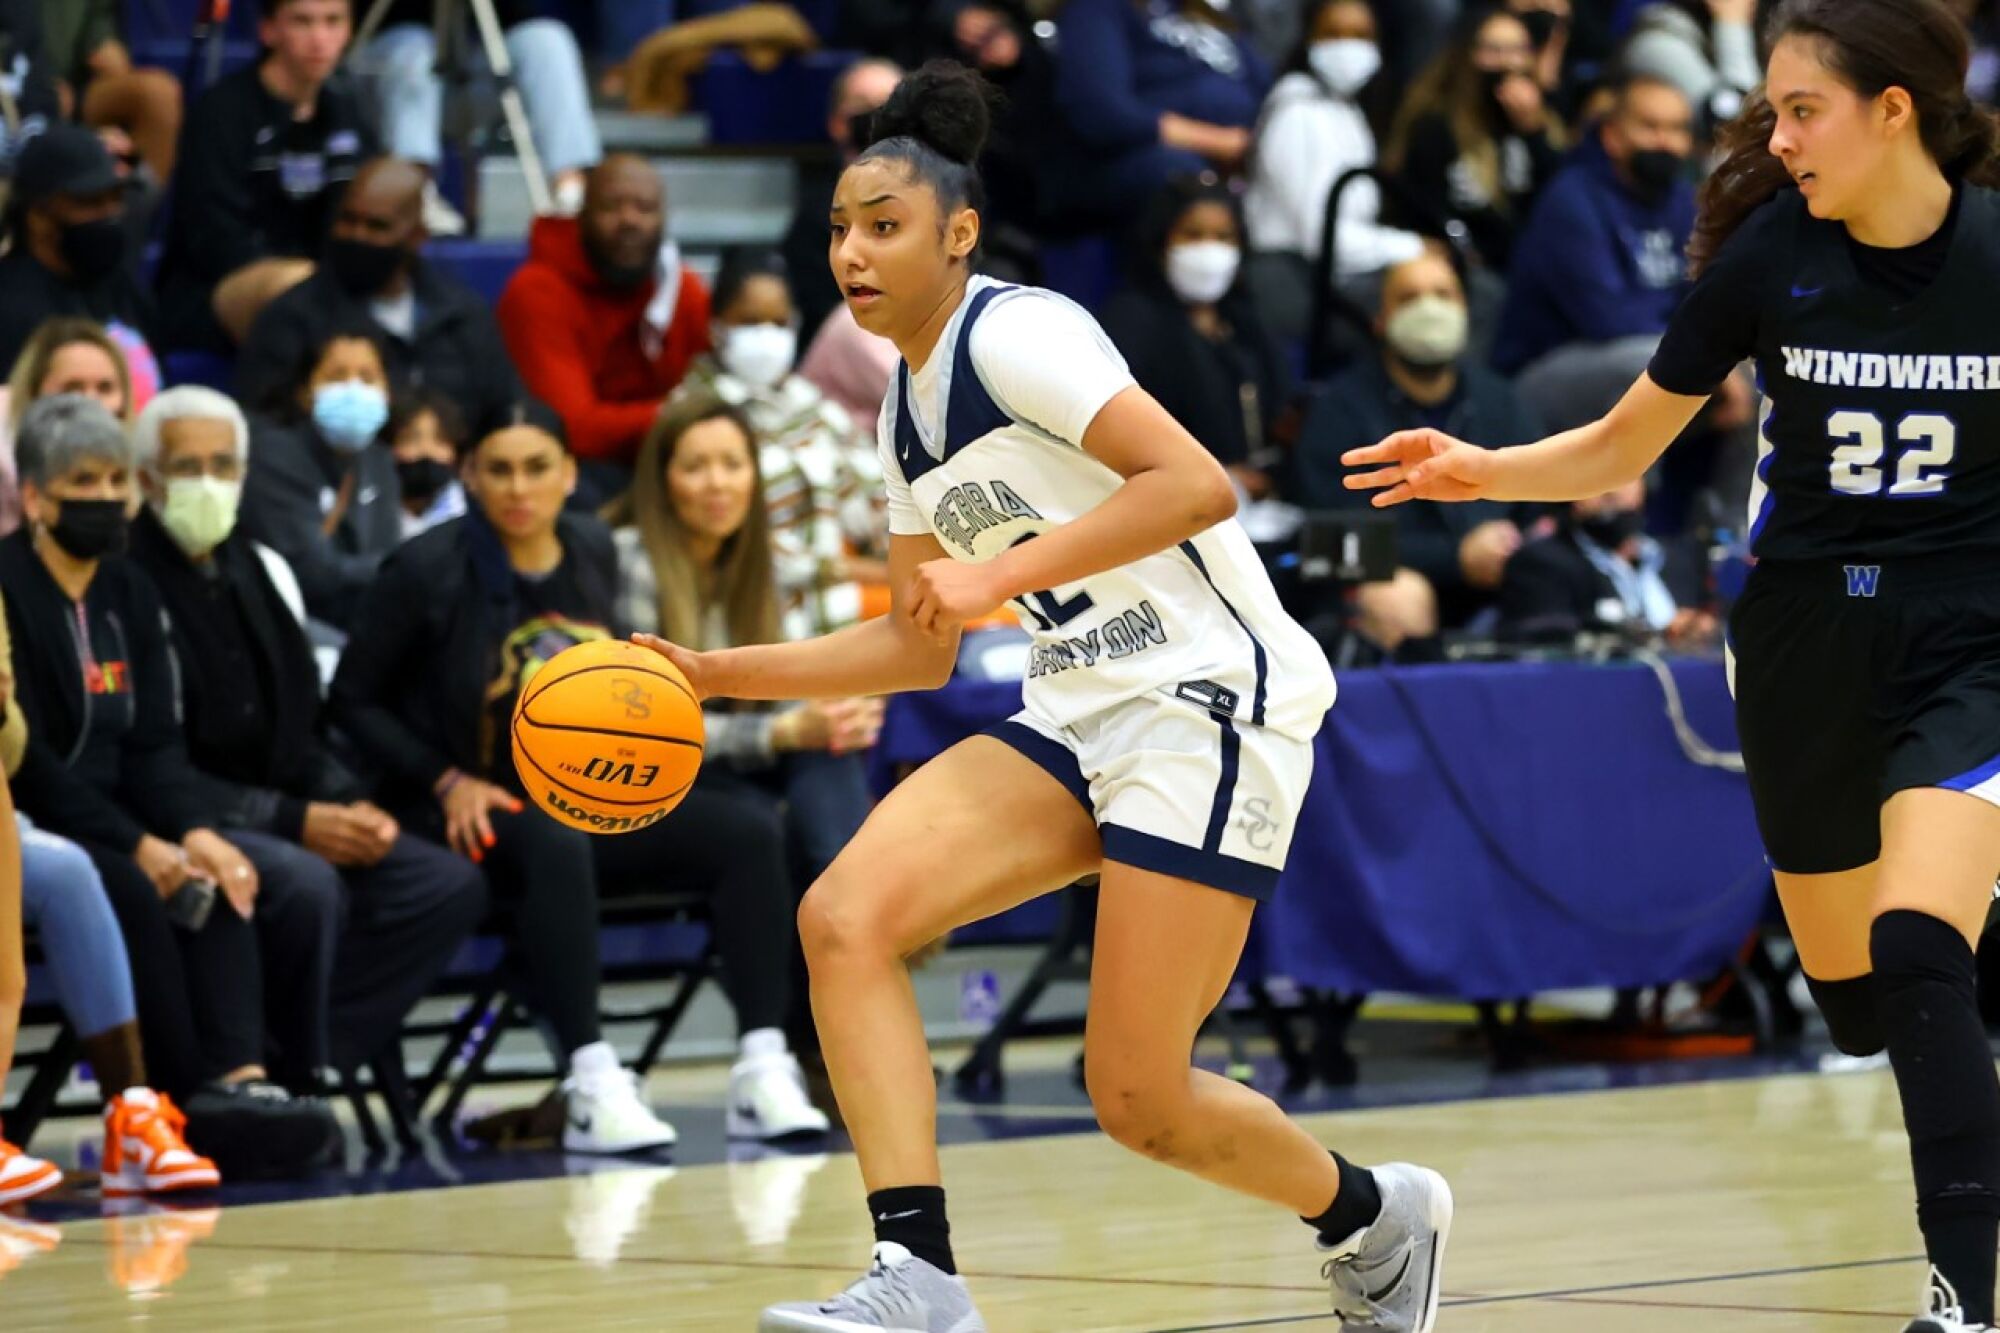 Sierra Canyon's Juju Watkins brings the ball up court during a game against Windward.